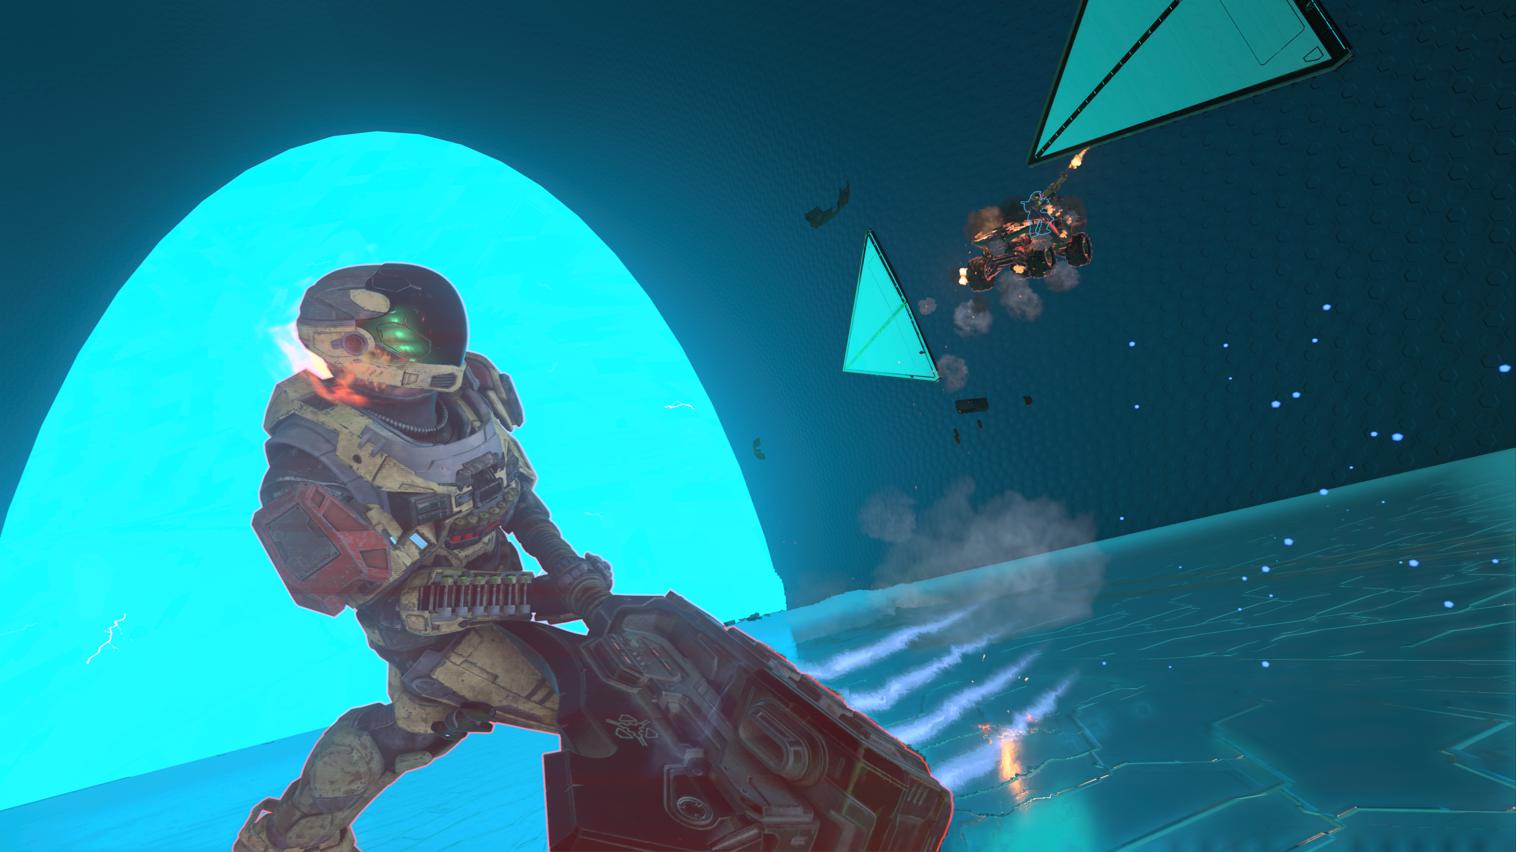 A player with a gravity hammer attempts to smash a Warthog that tumbles by them.